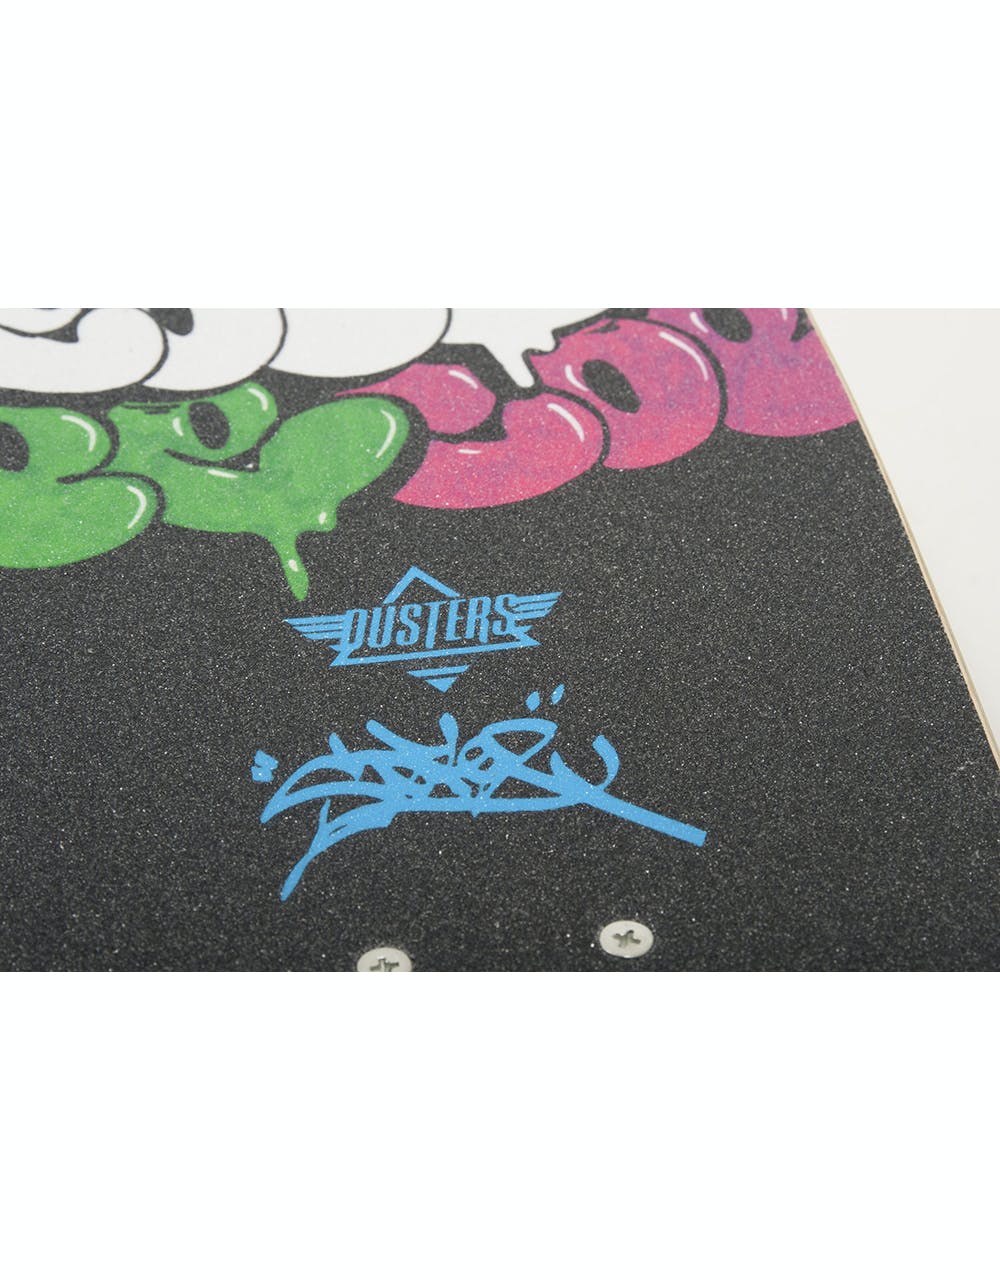 Dusters Cope 2 Cruiser - 8.25" x 30"